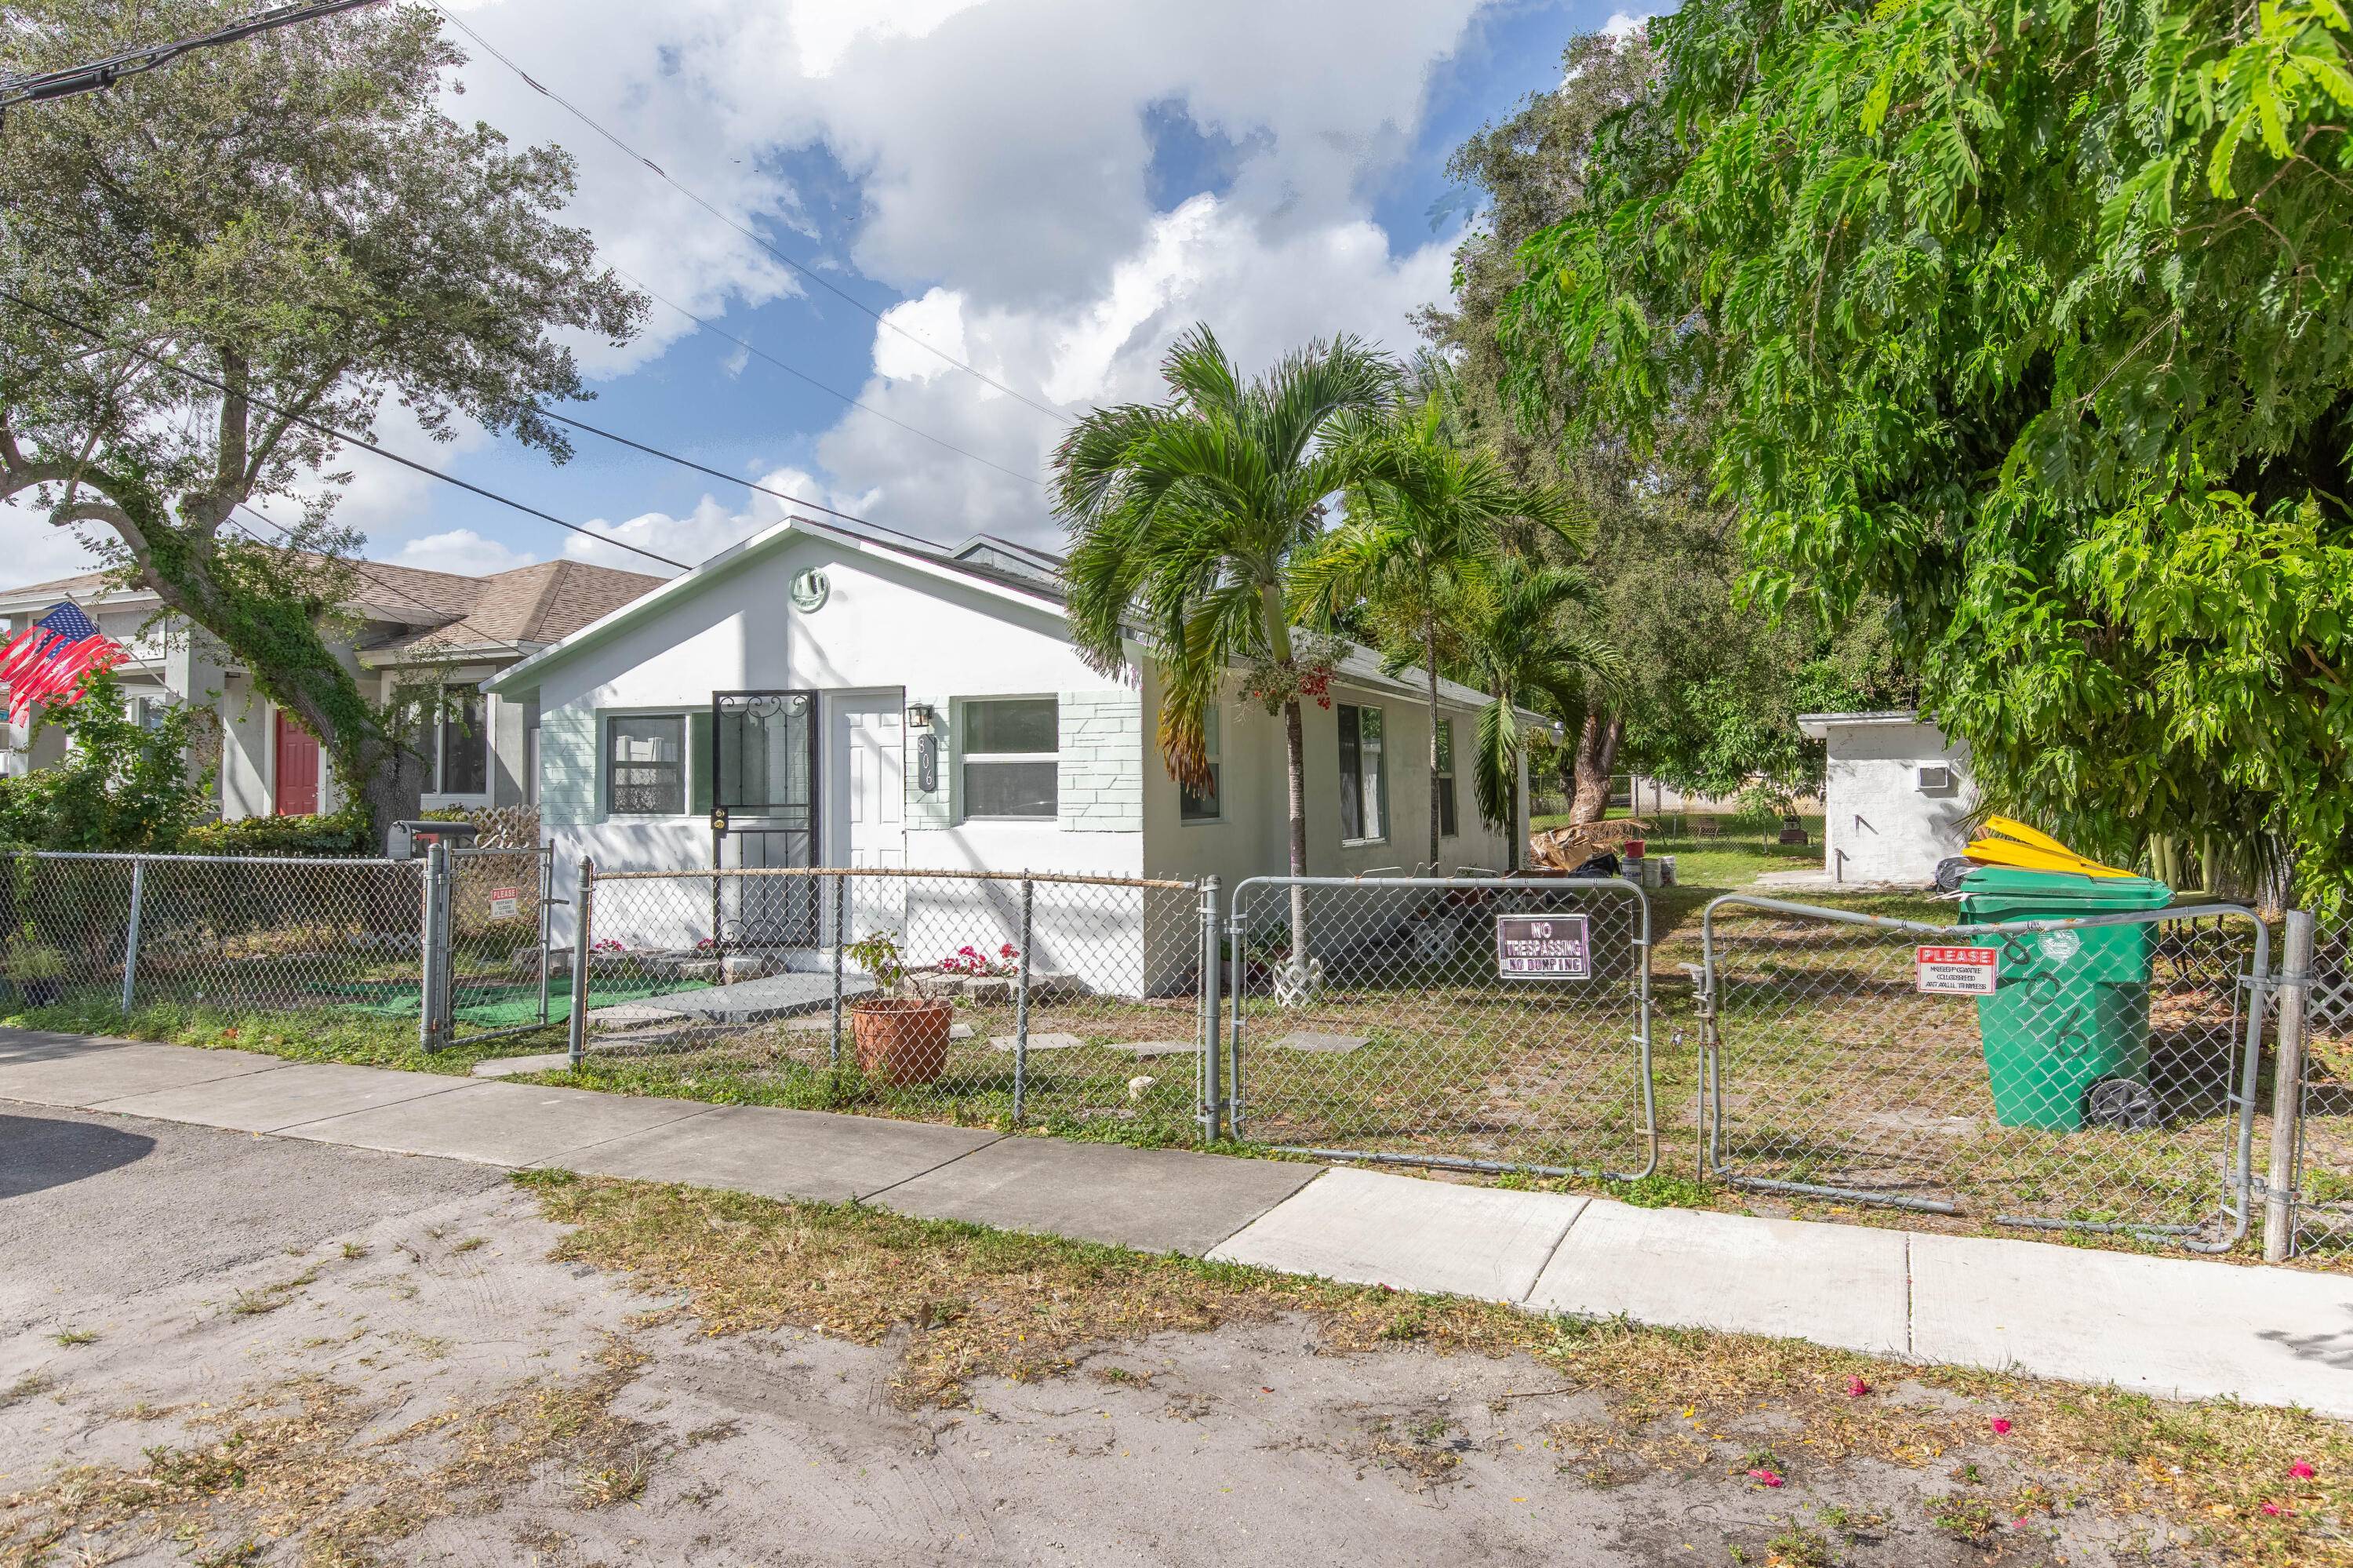 This property is in the highly desirable Dania Beach area offering 2BD 1BA.